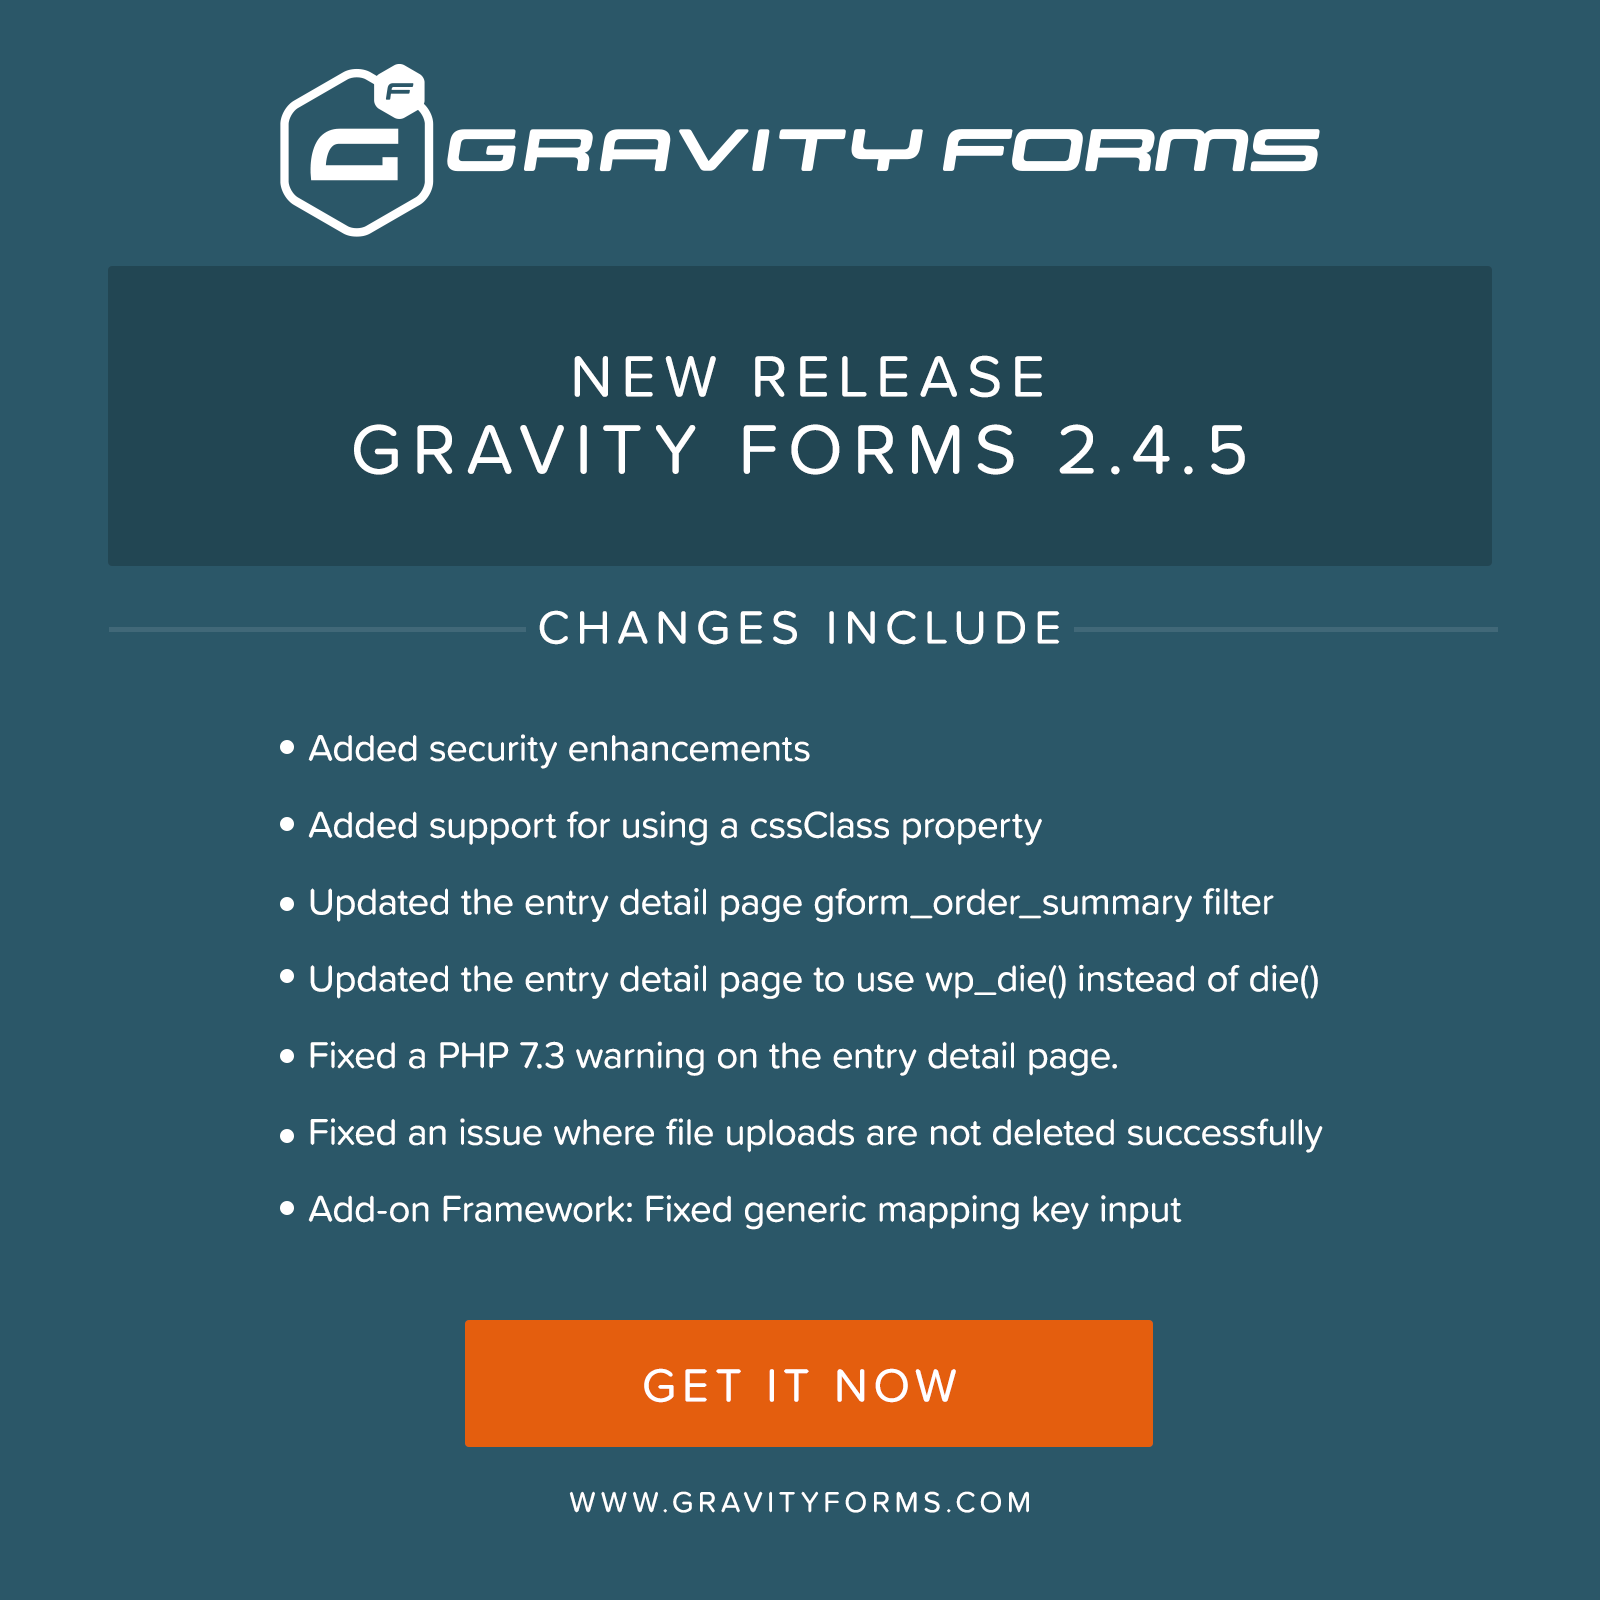 Gravity Forms 2.4.5 Release Notes